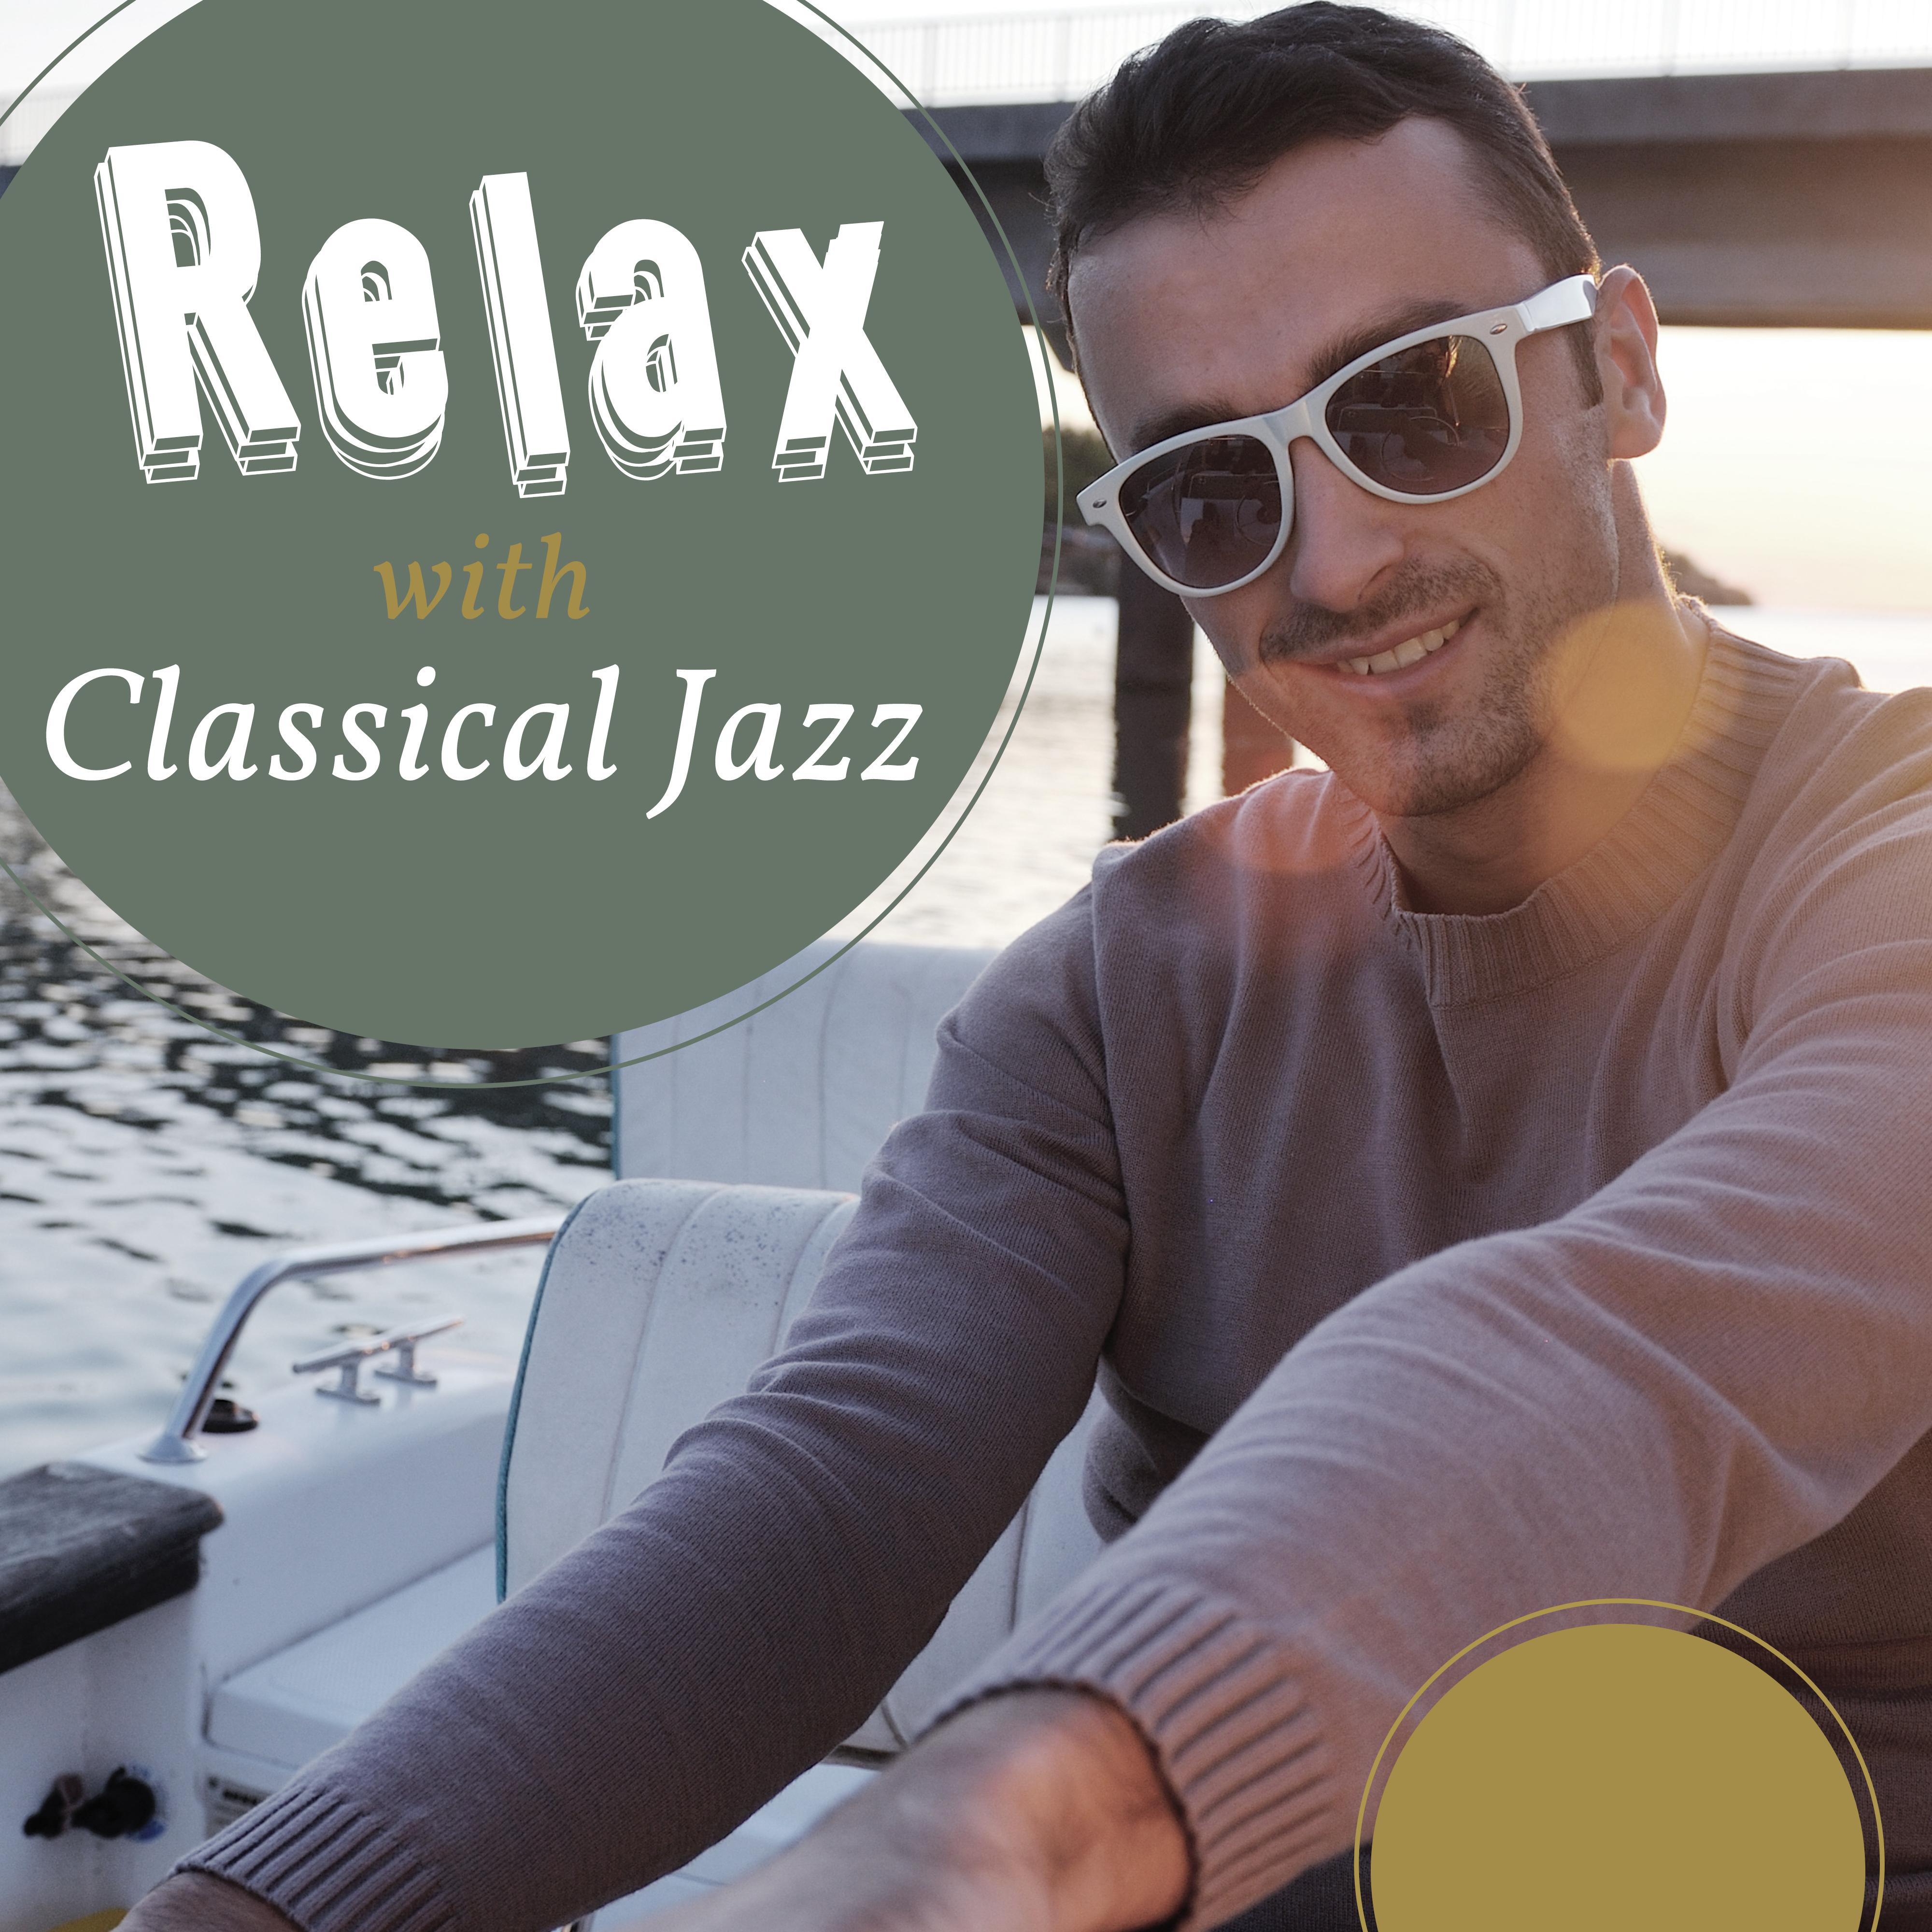 Relax with Classical Jazz  Soft Music, Jazz Vibes, Instrumental Melodies to Rest, Pure Sleep, Jazz at Night